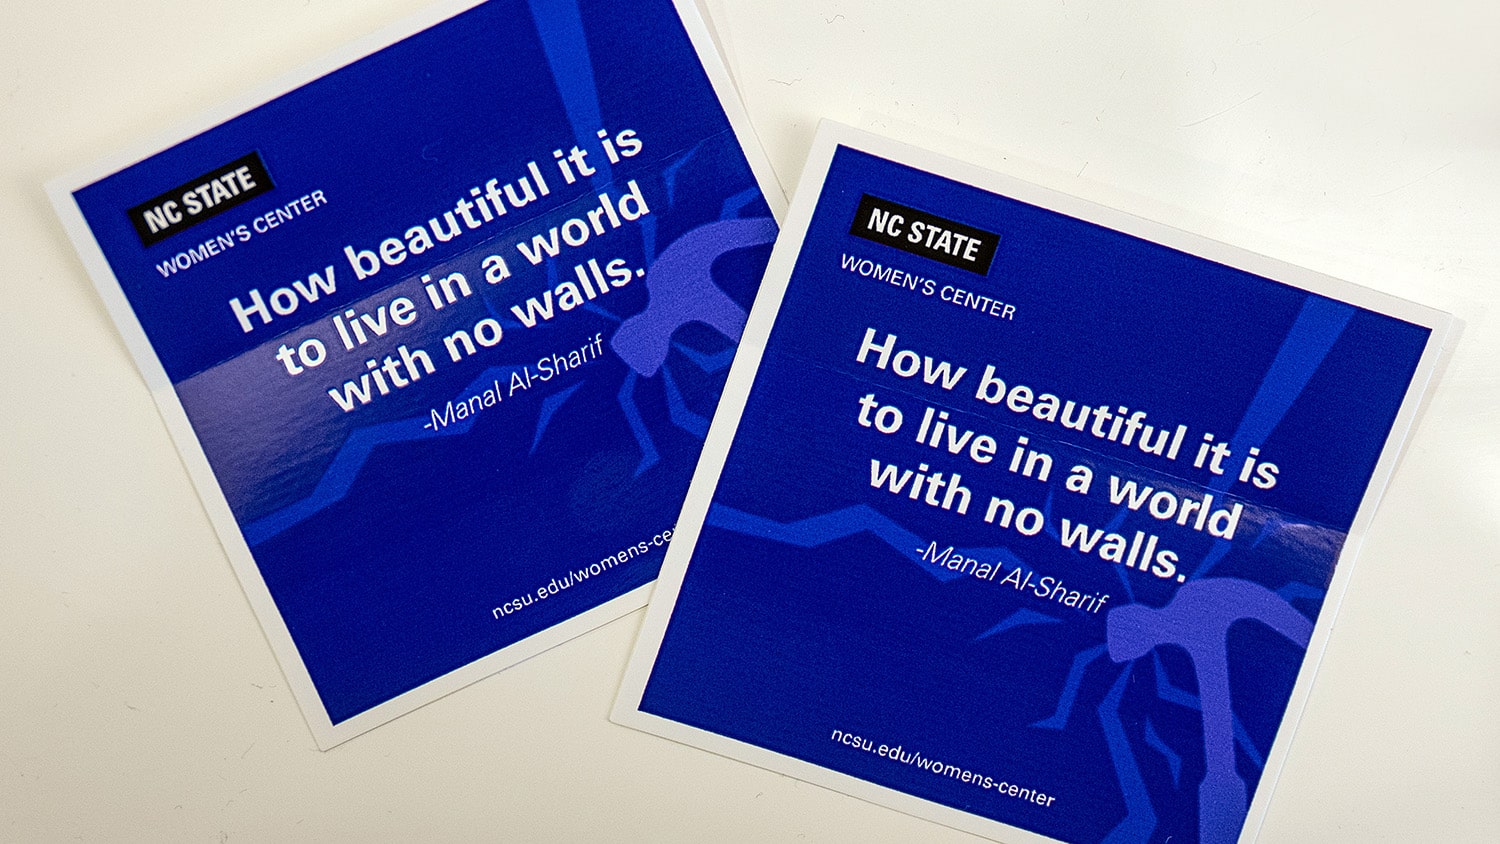 A sticker reads "How beautiful it is to live in a world with no walls."